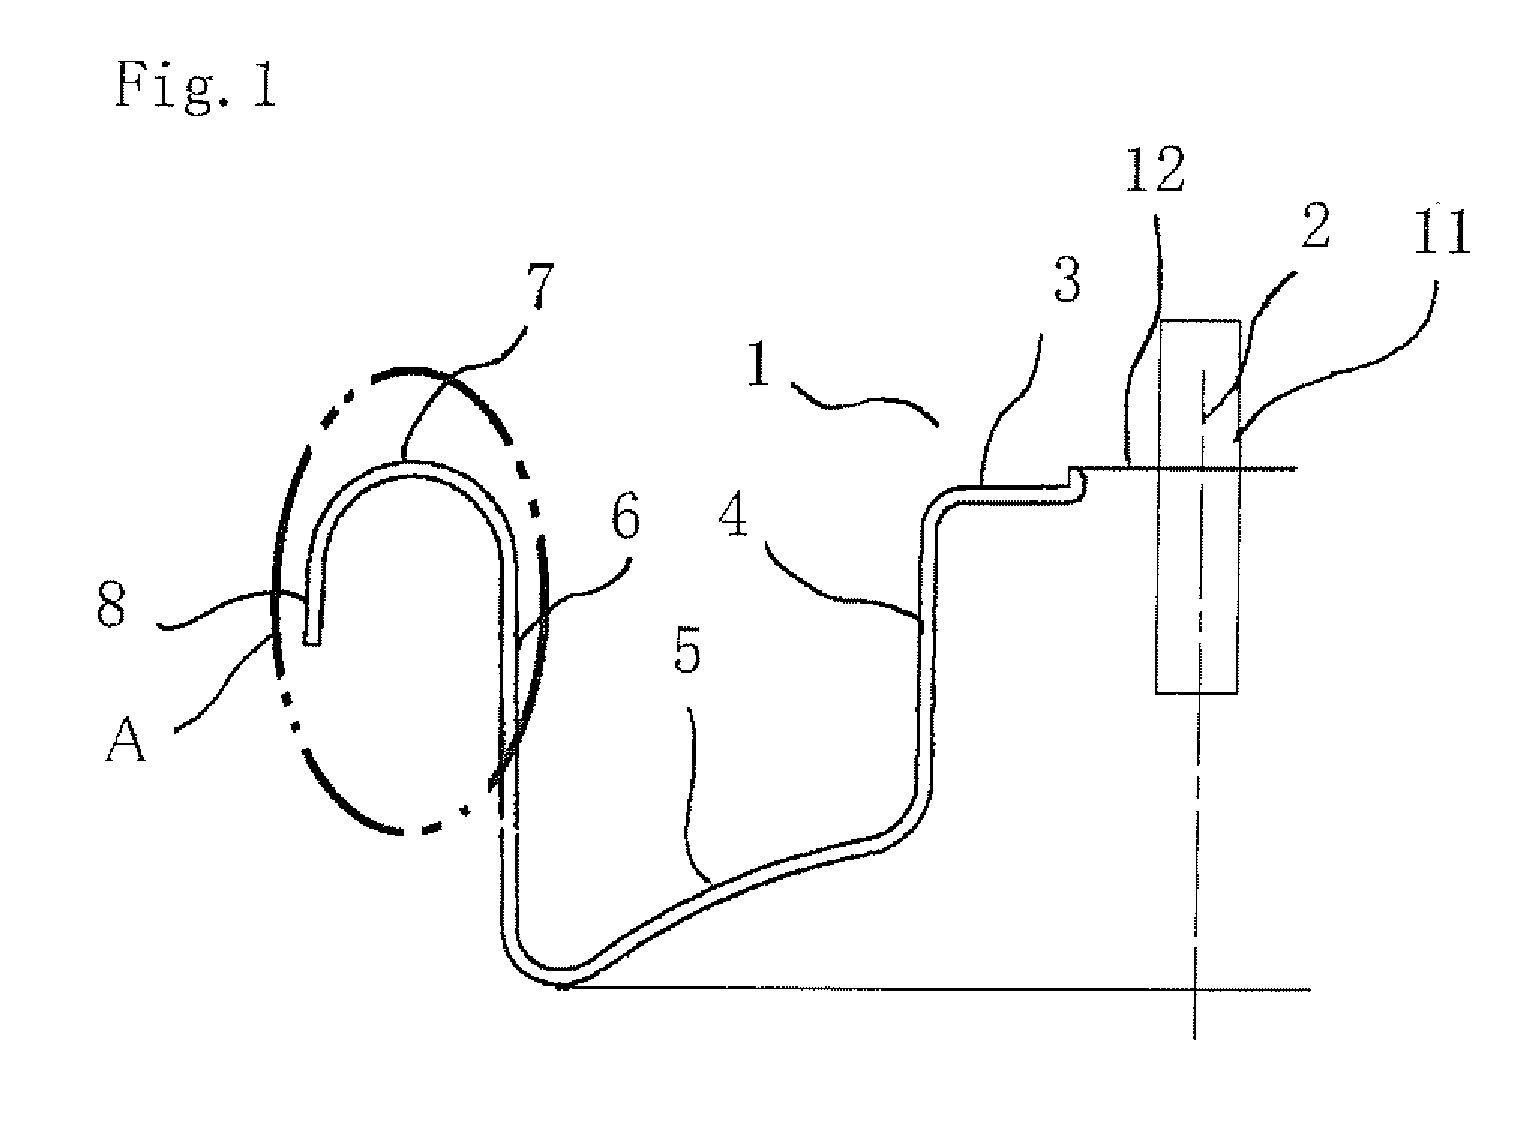 Structure of clinch portion of mounting cup